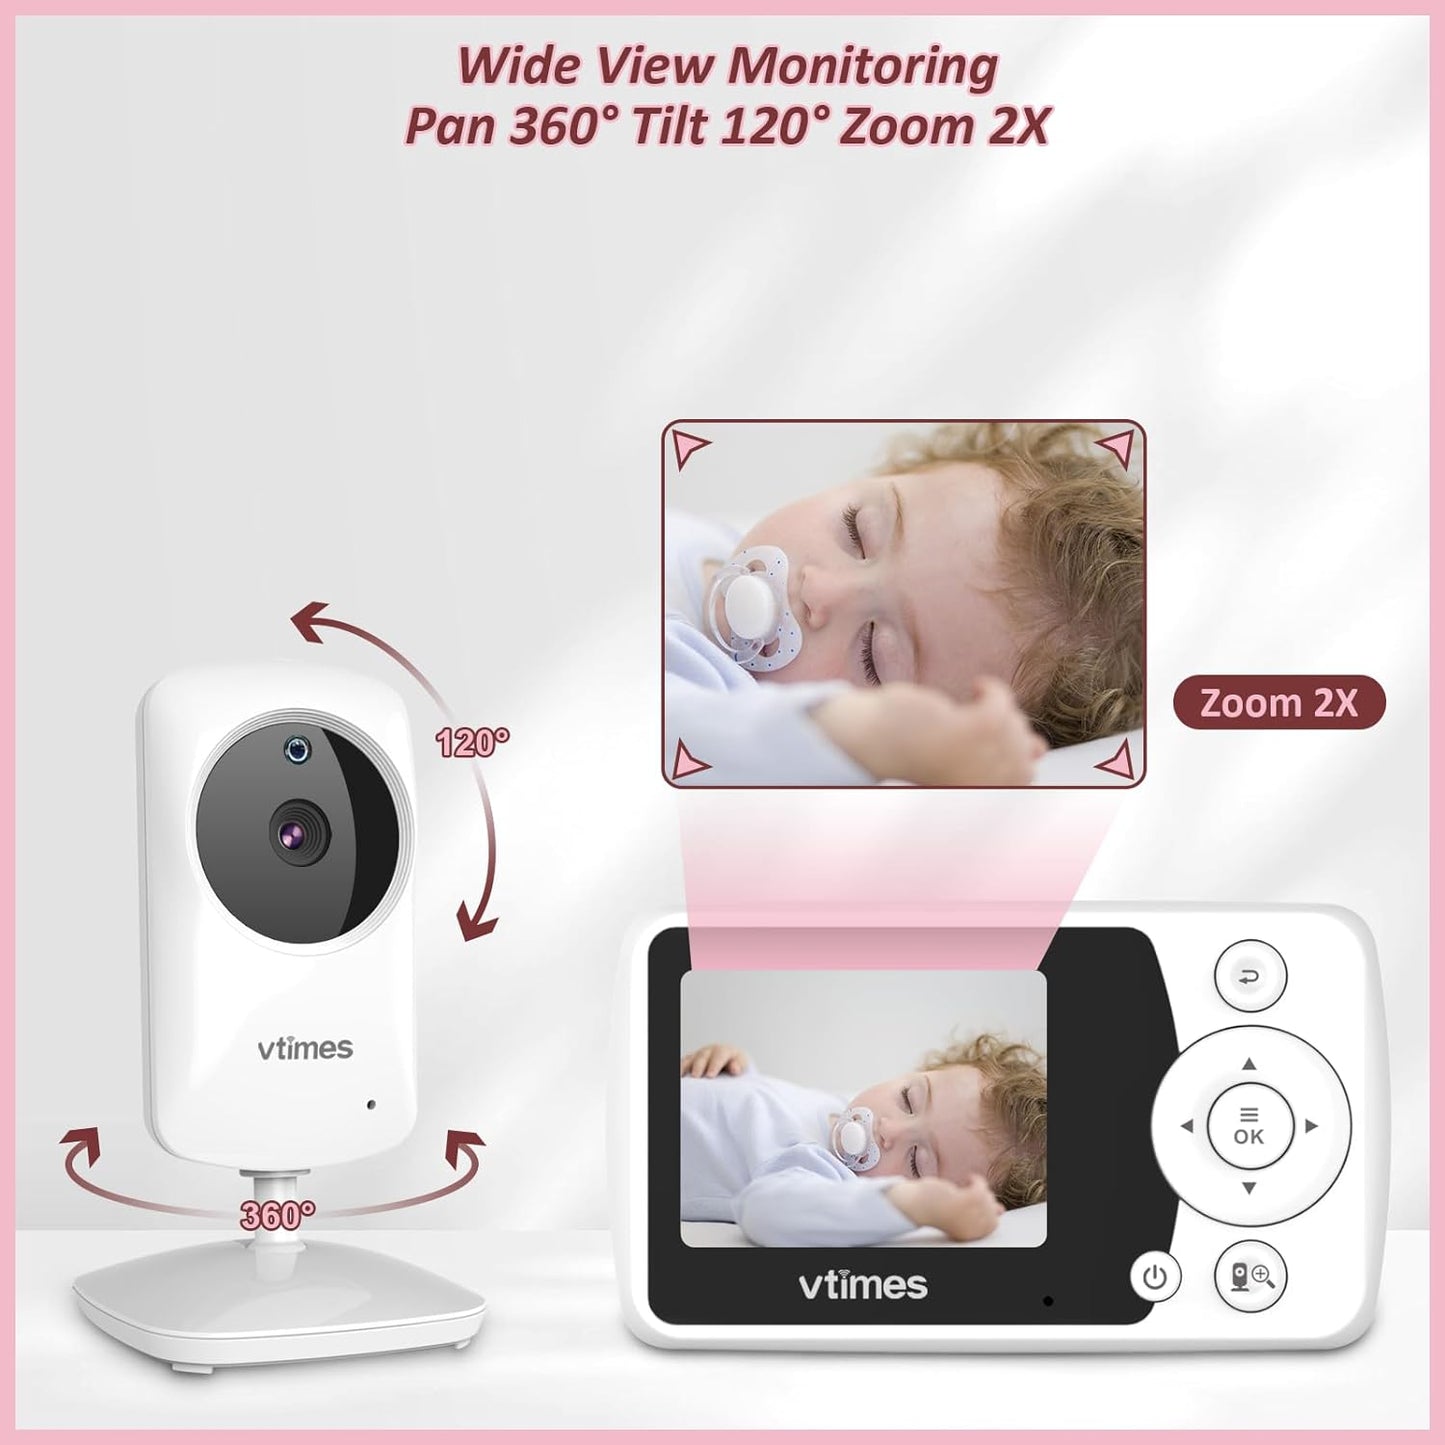 Baby Monitor, Audio, No WiFi Night Vision, VOX, PTZ Alarm & 1000ft Range, Ideal for Gifts